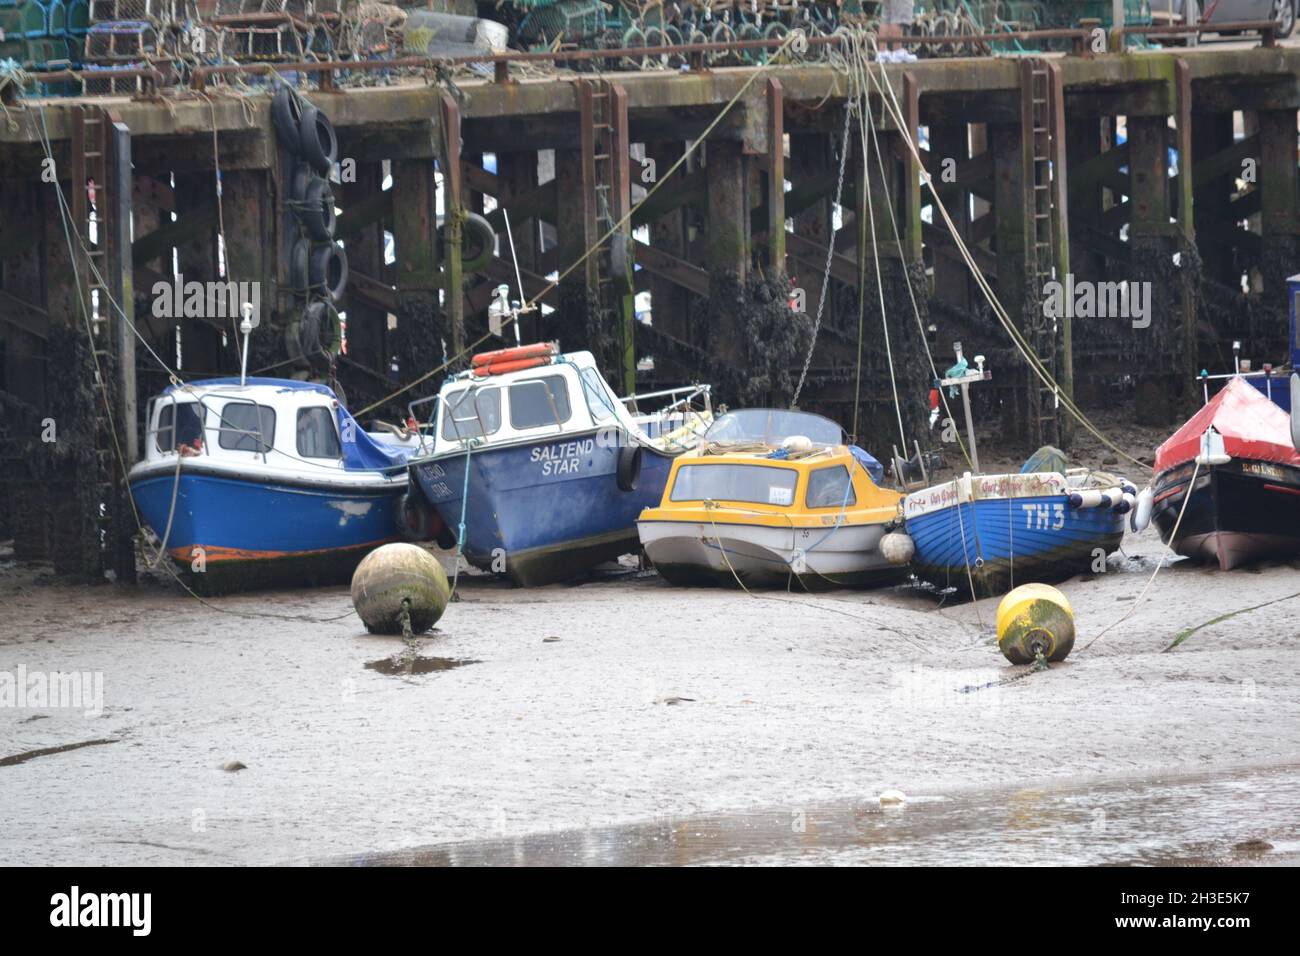 Tide Out At Bridlington Harbour - Grounded Boats - Yachts - Fishing Boats - Low Tide - Mud Flats - East Riding Of Yorkshire - UK Stock Photo